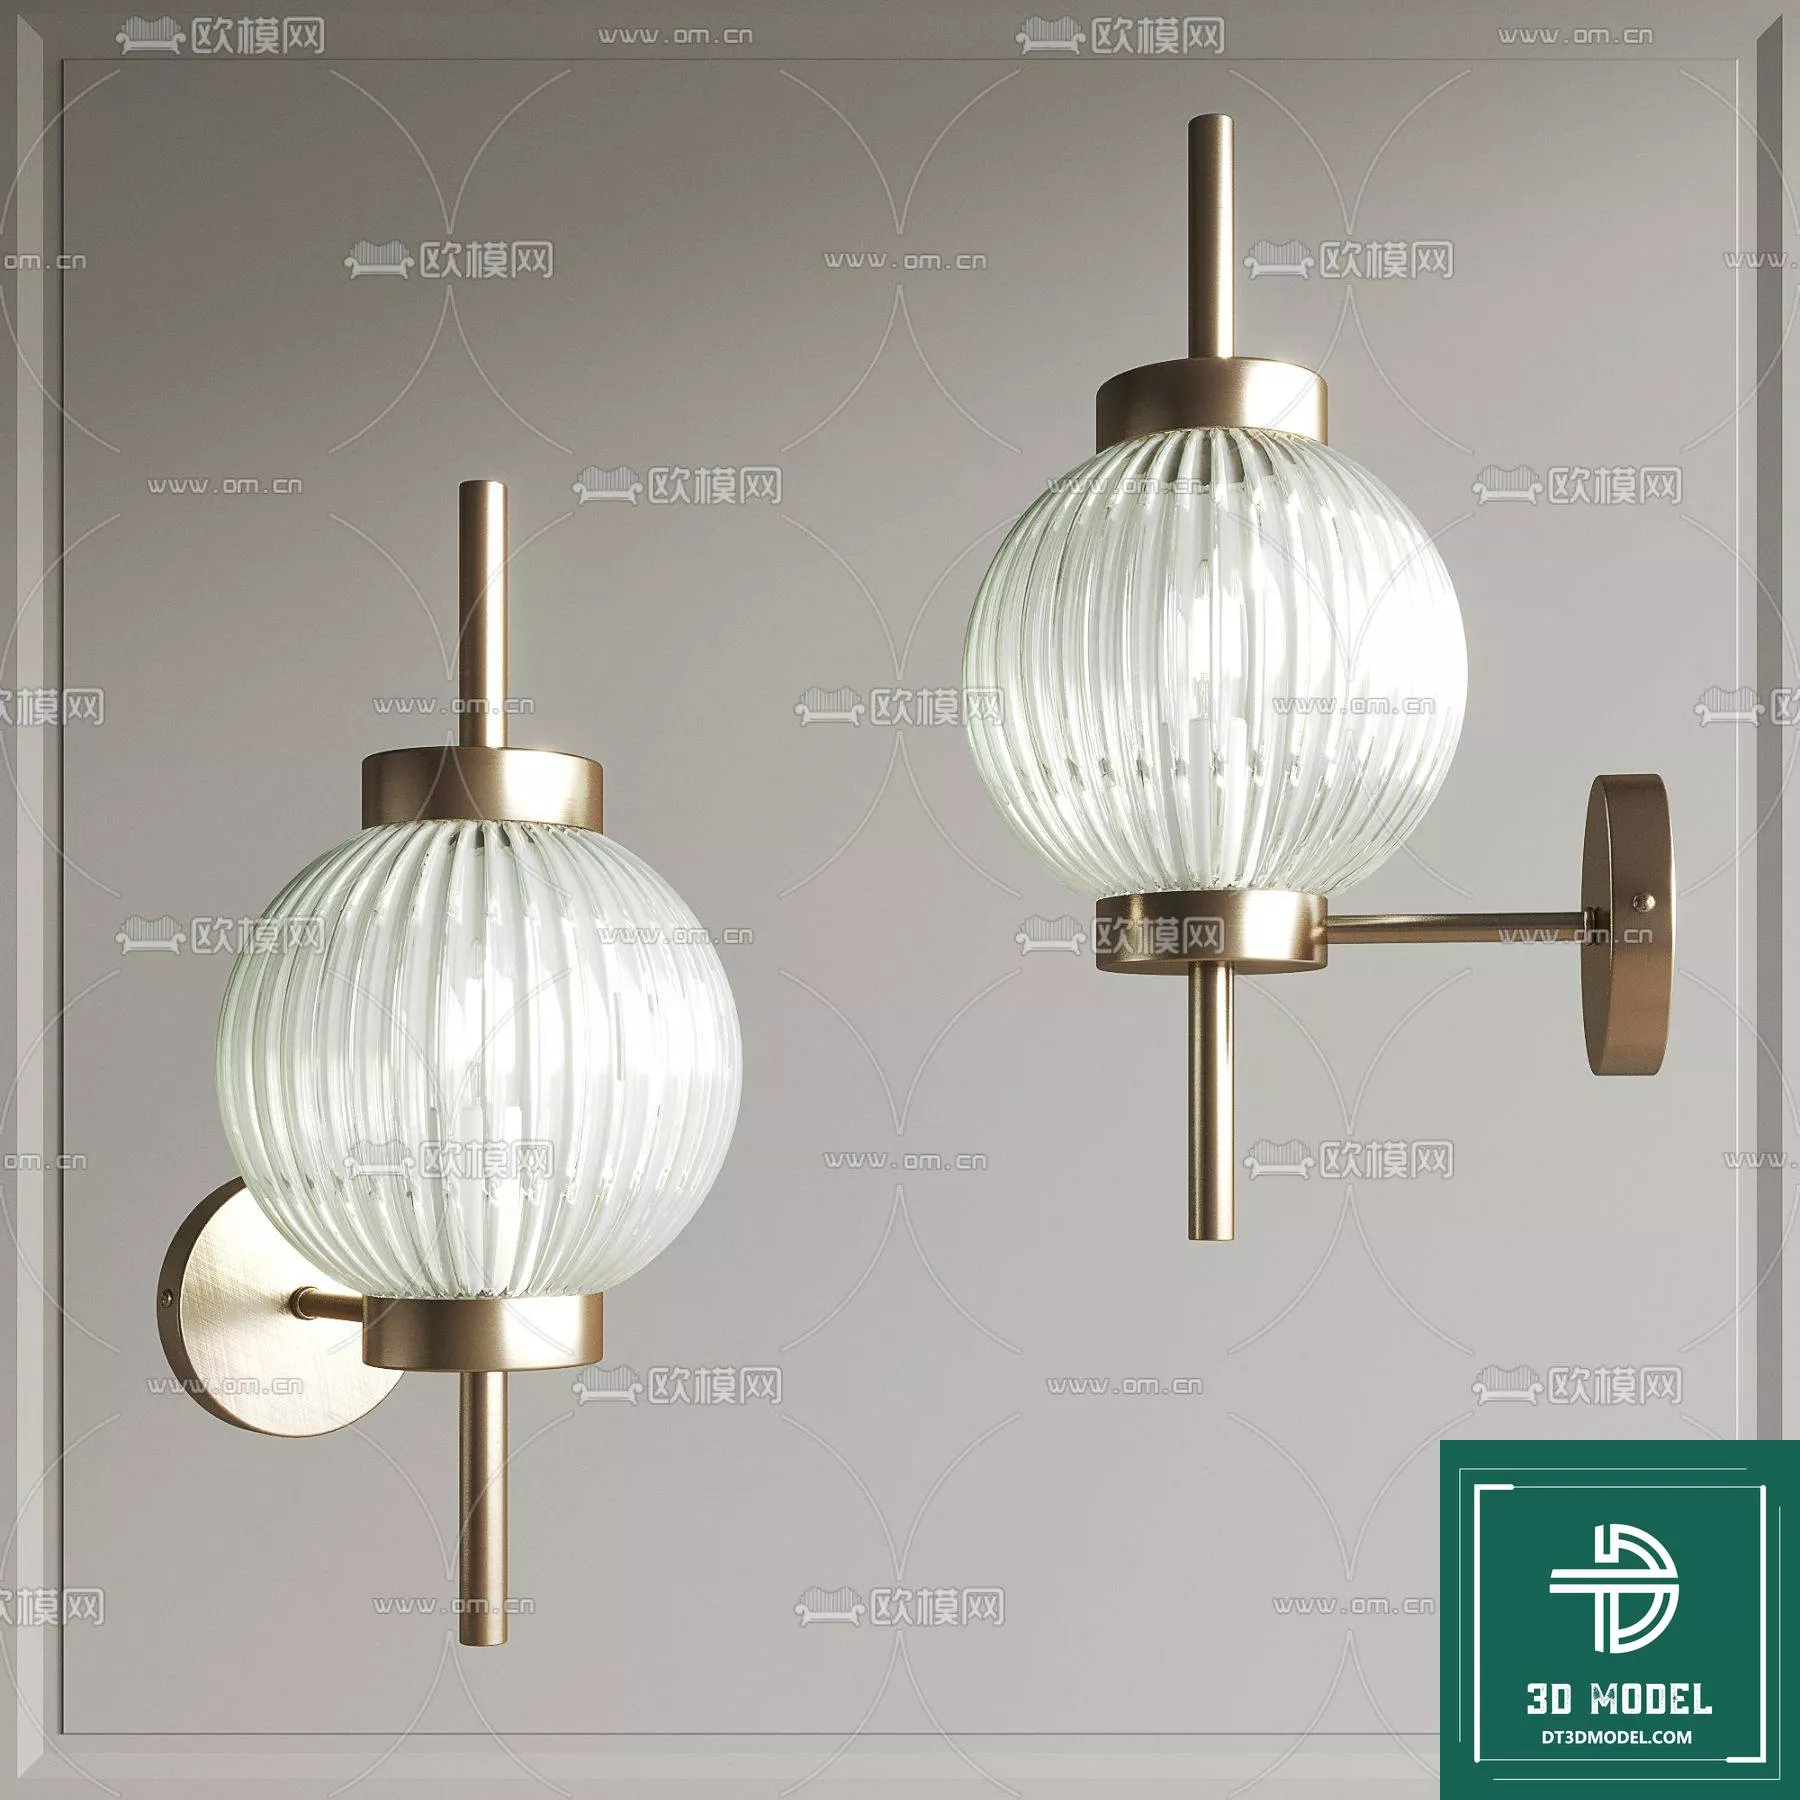 MODERN WALL LAMP - SKETCHUP 3D MODEL - VRAY OR ENSCAPE - ID16034